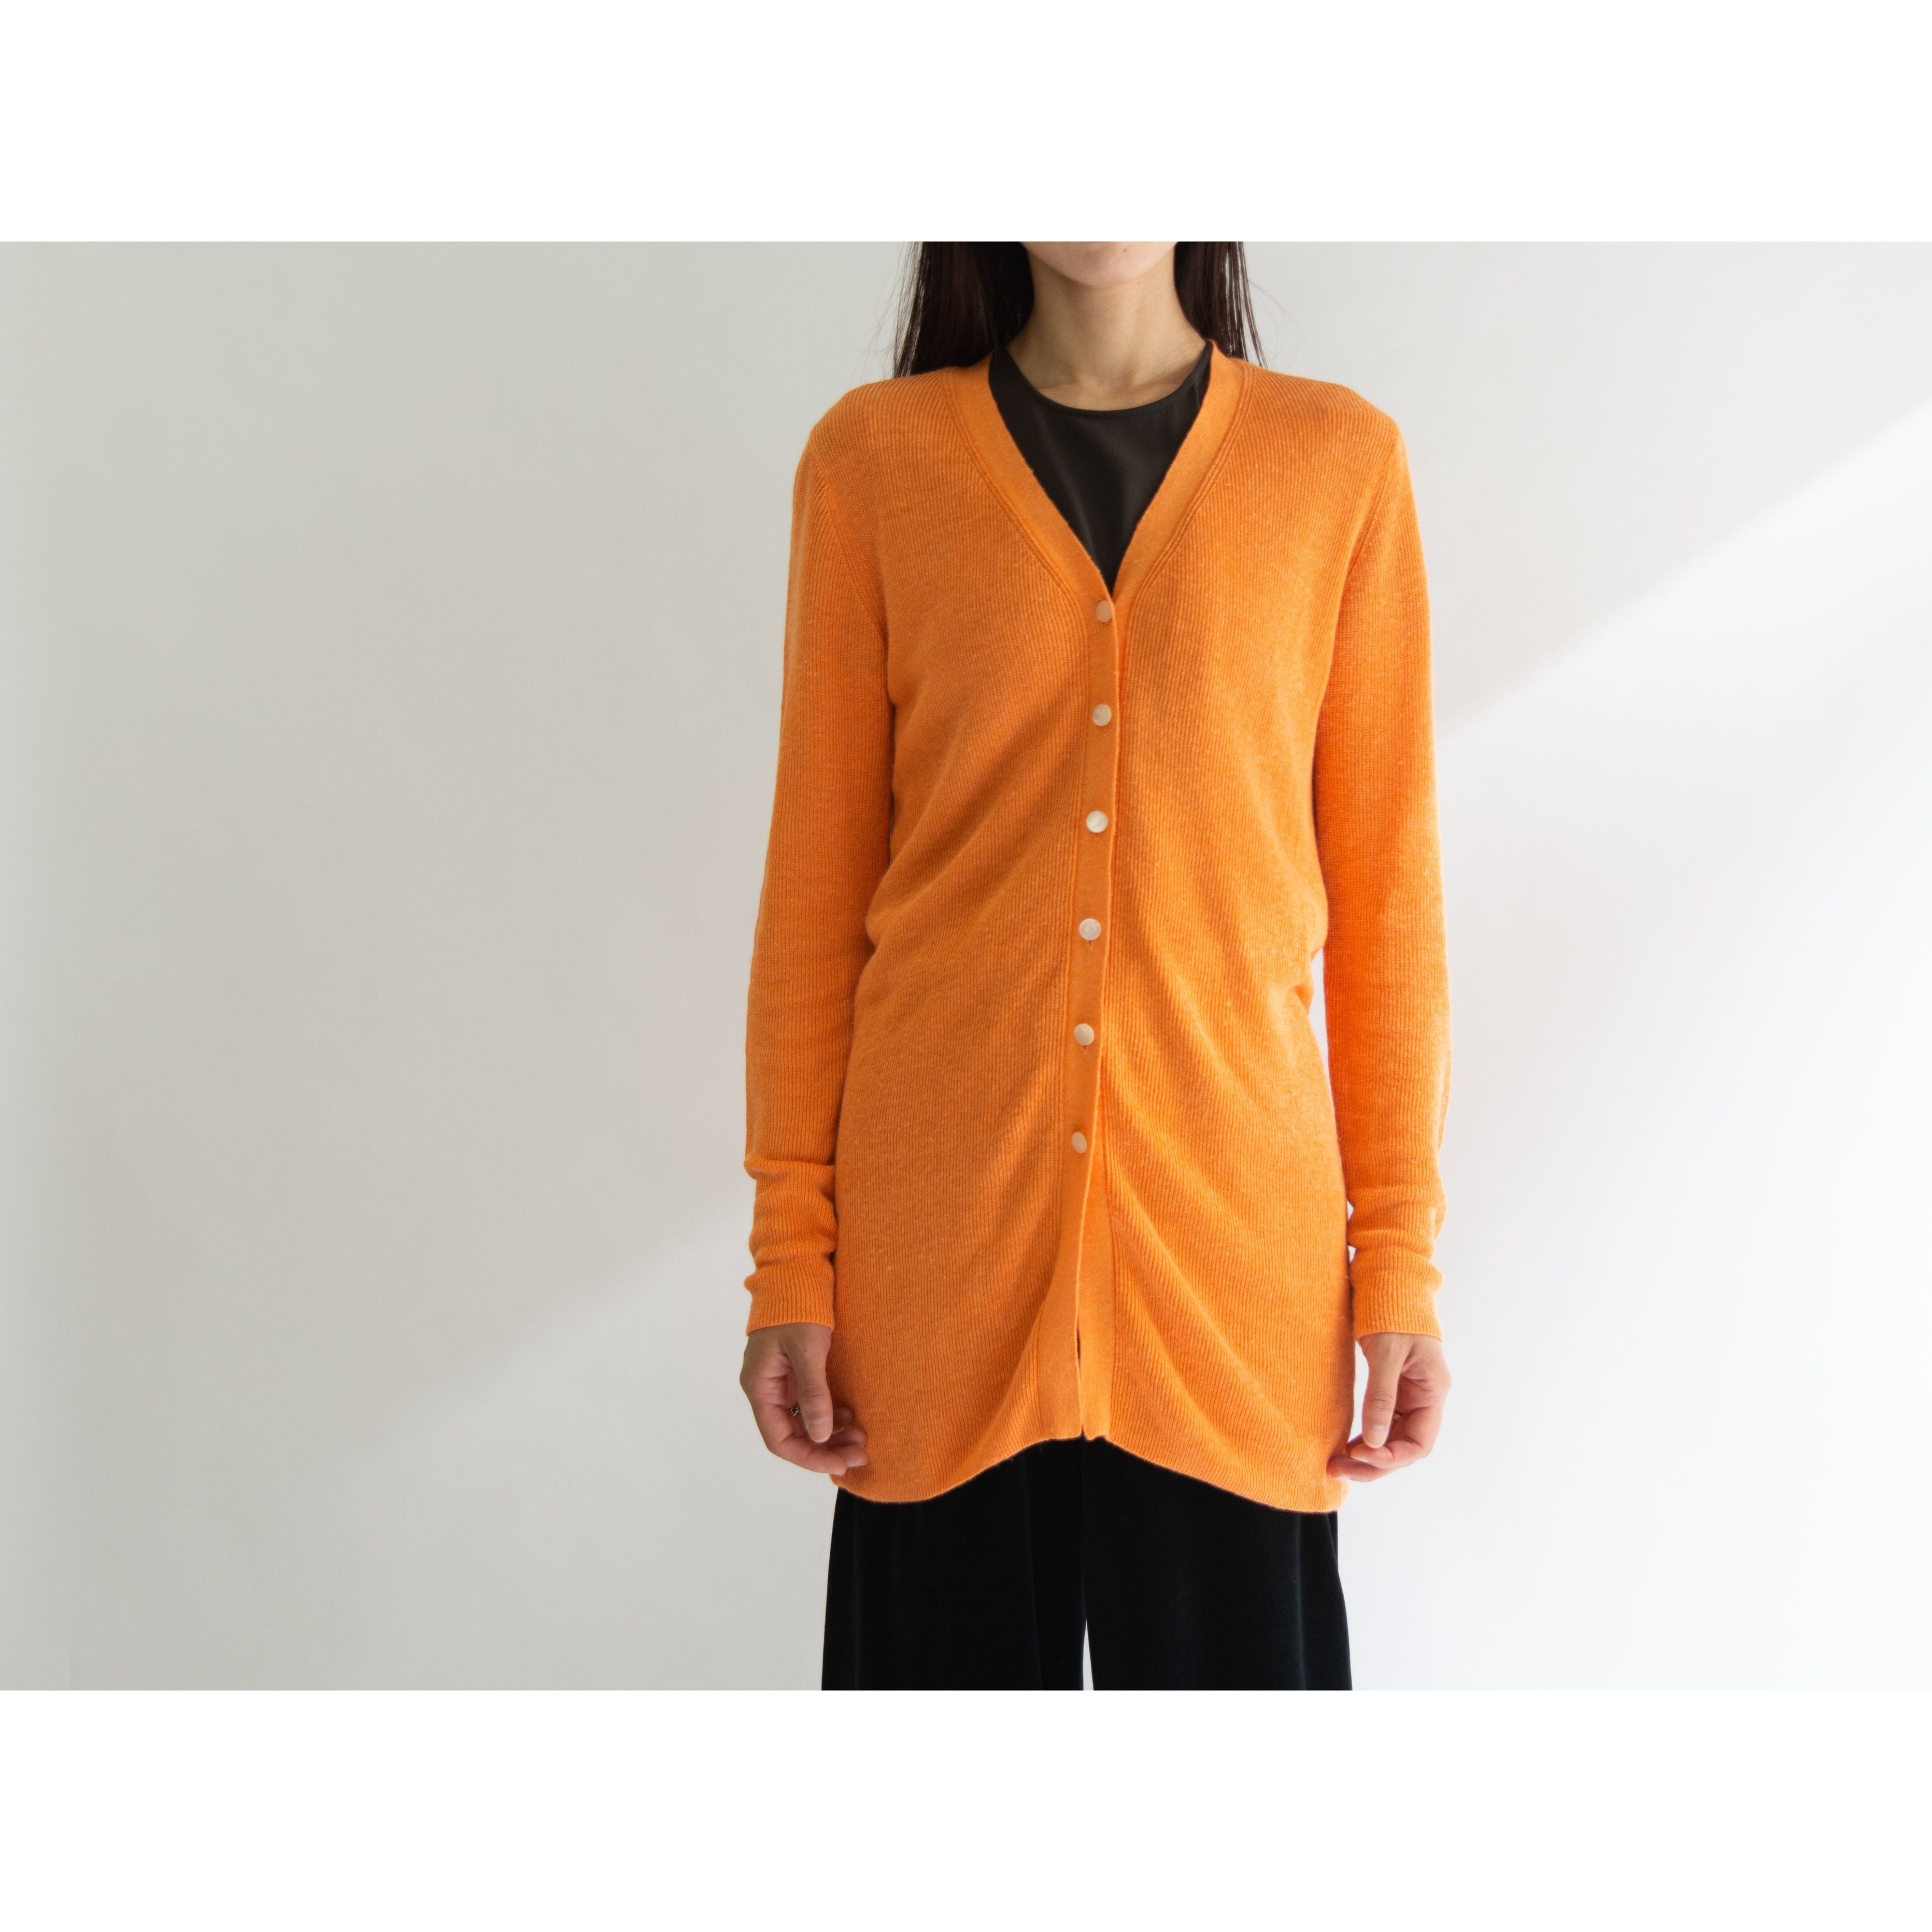 VAL by VALENTINO】 Made in China Linen-Rayon Cardigan（バル バイ ...